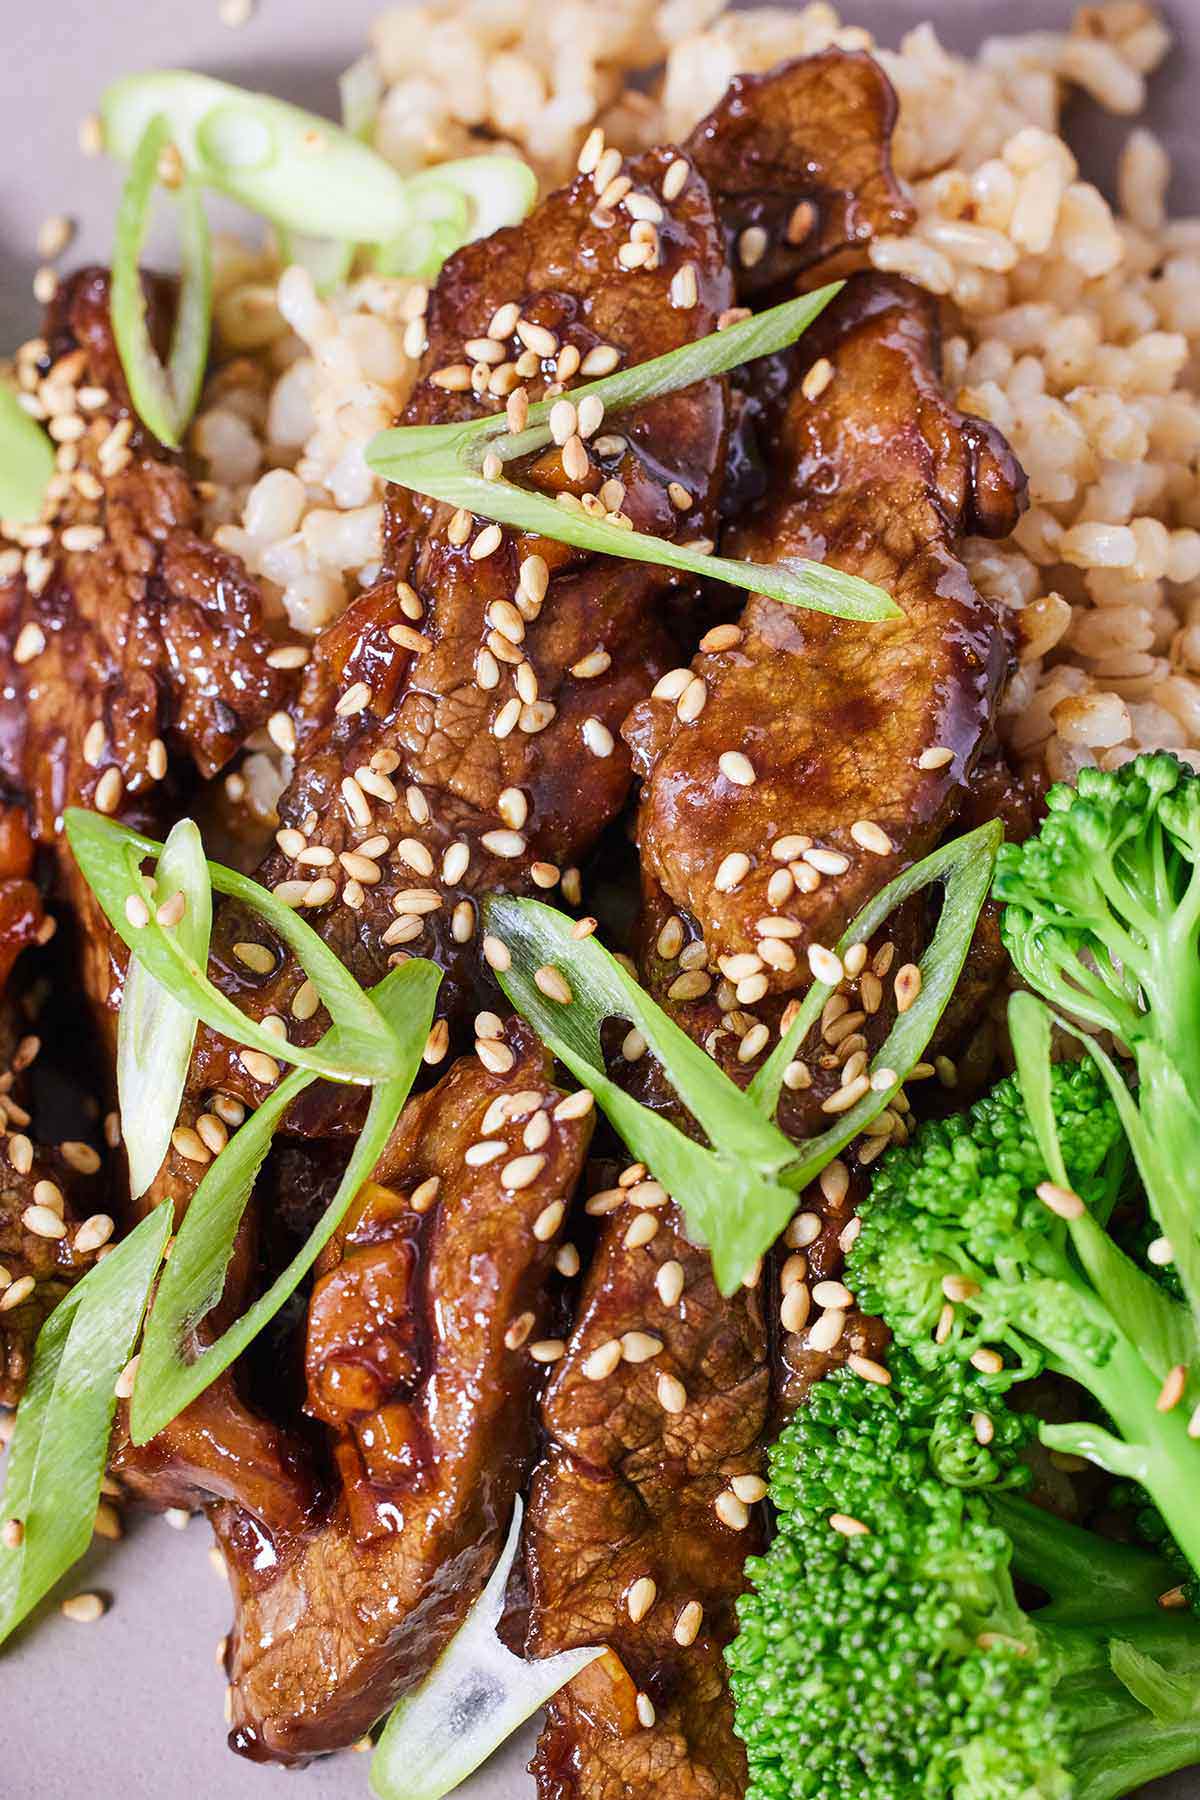 Close up view of orange beef with green onions and sesame seeds beside some broccoli and rice.